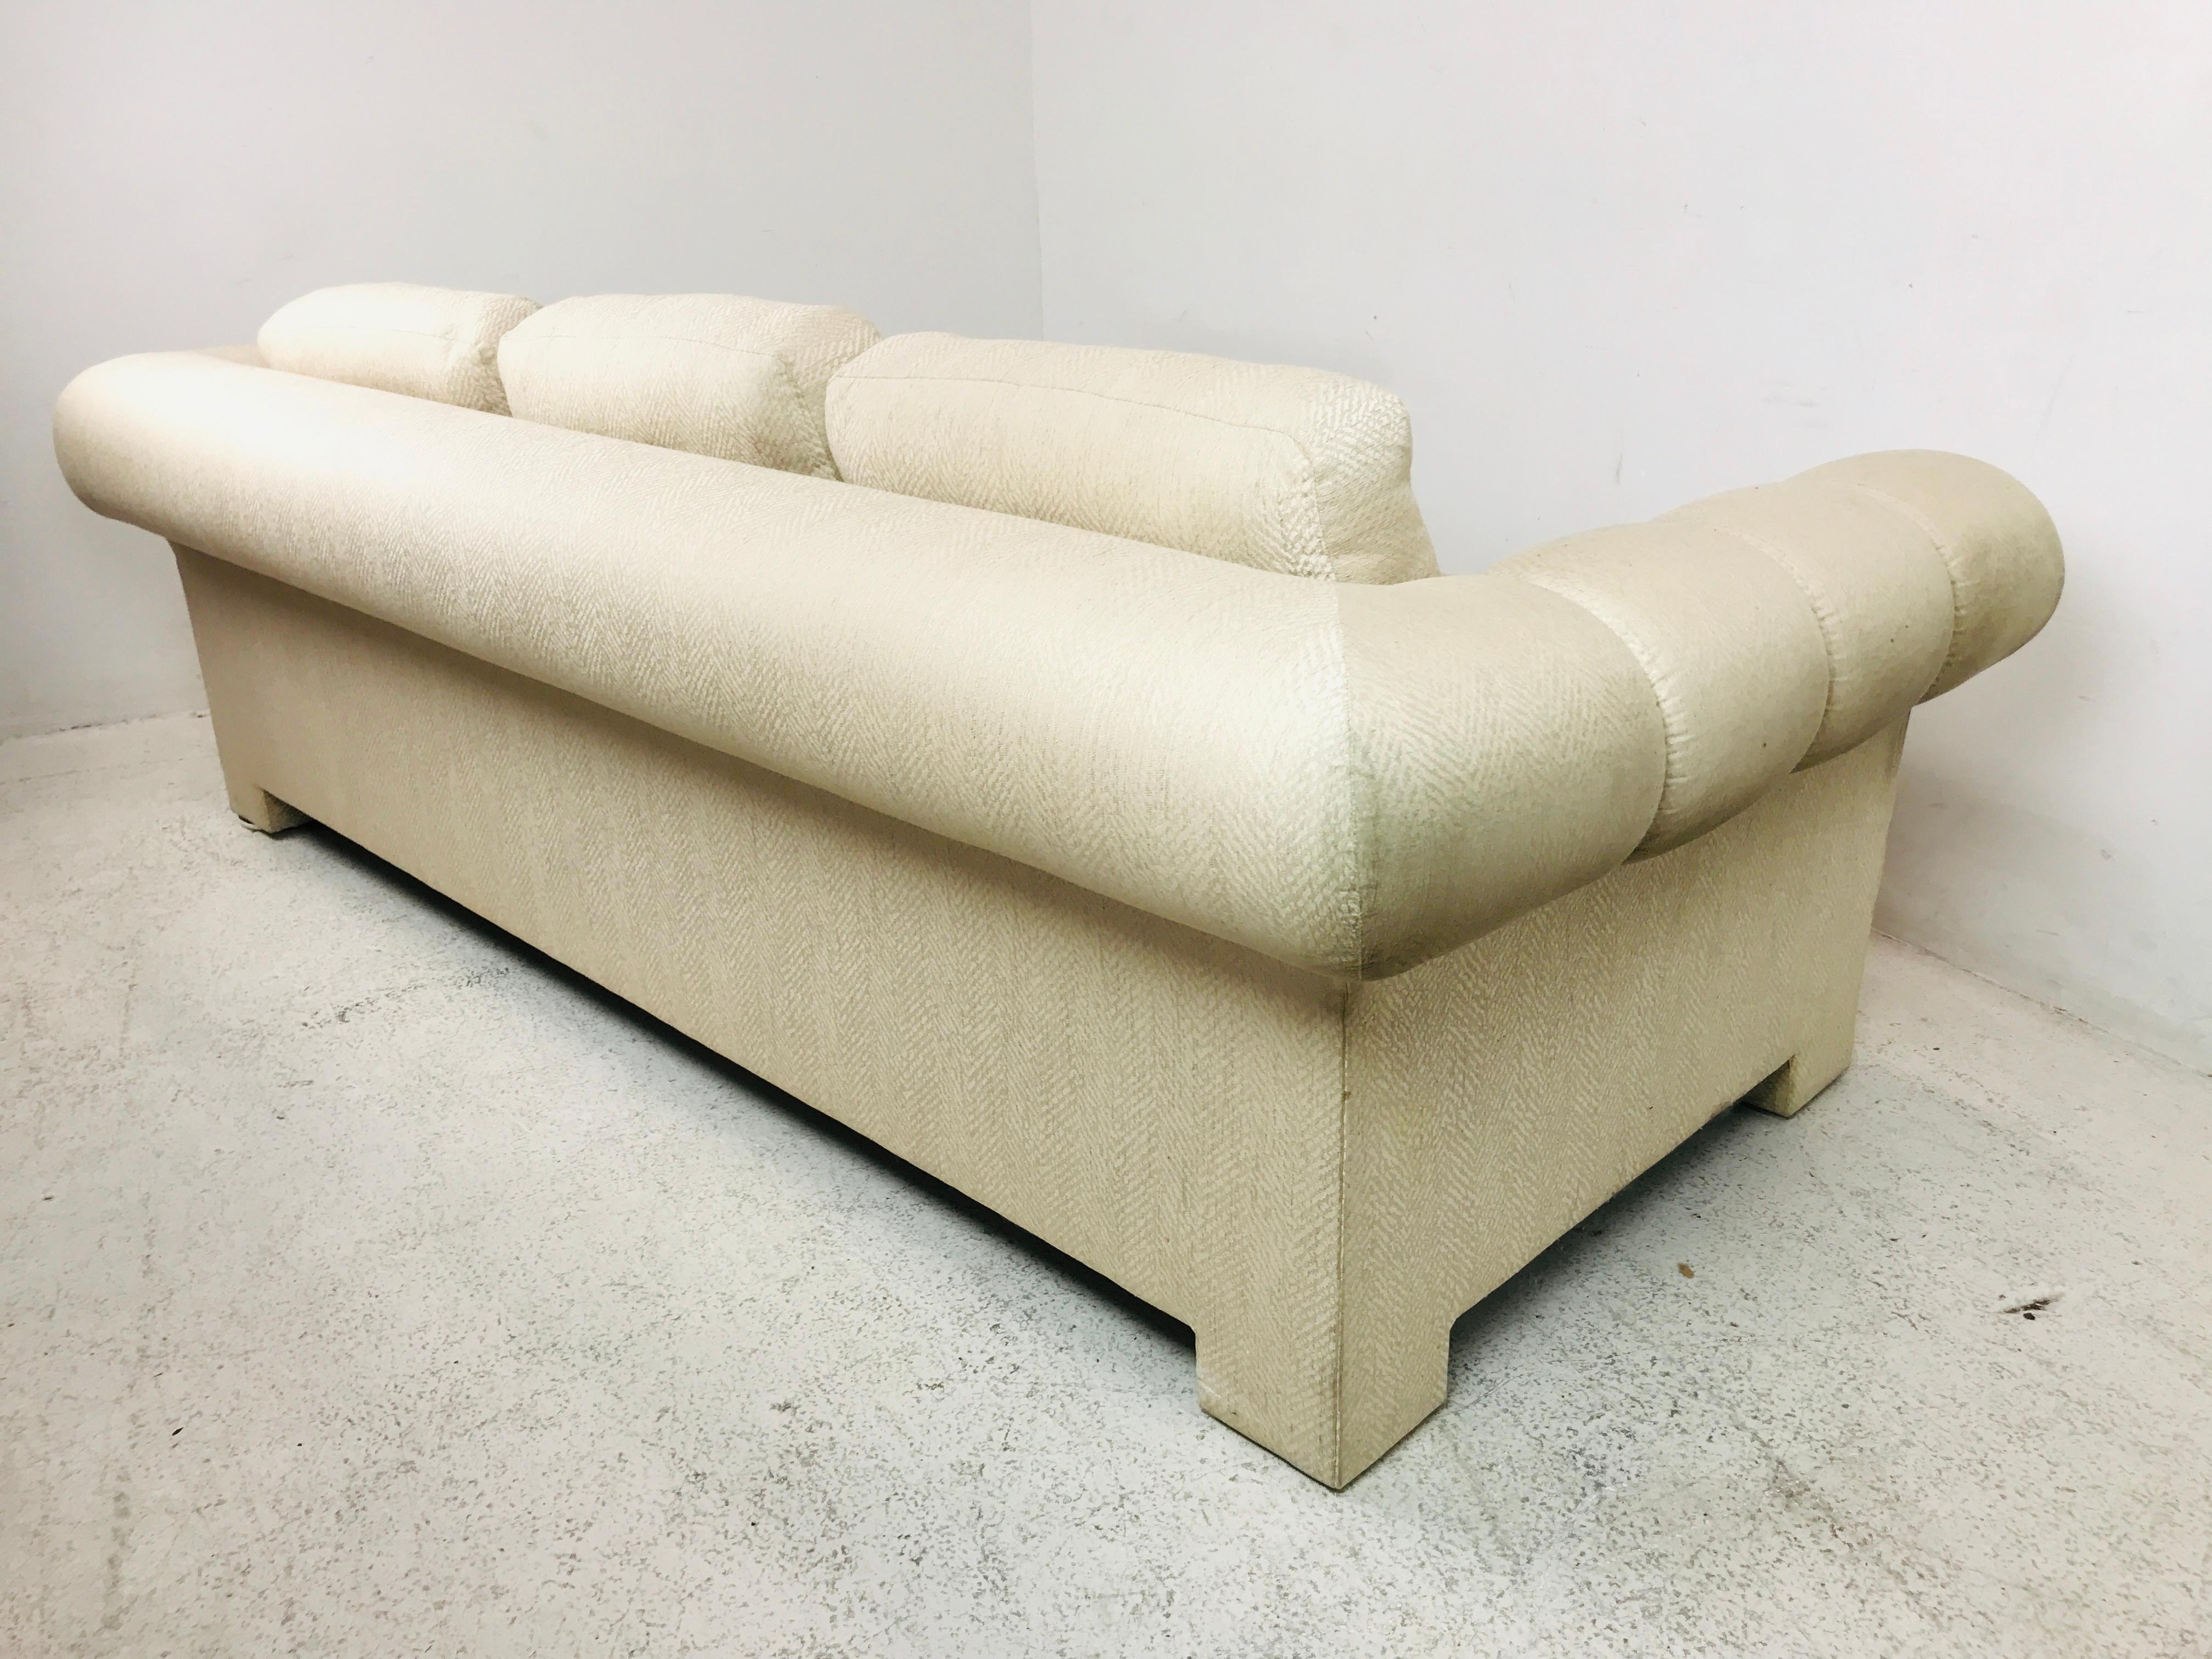 Upholstery Marge Carson 1980s Sofa